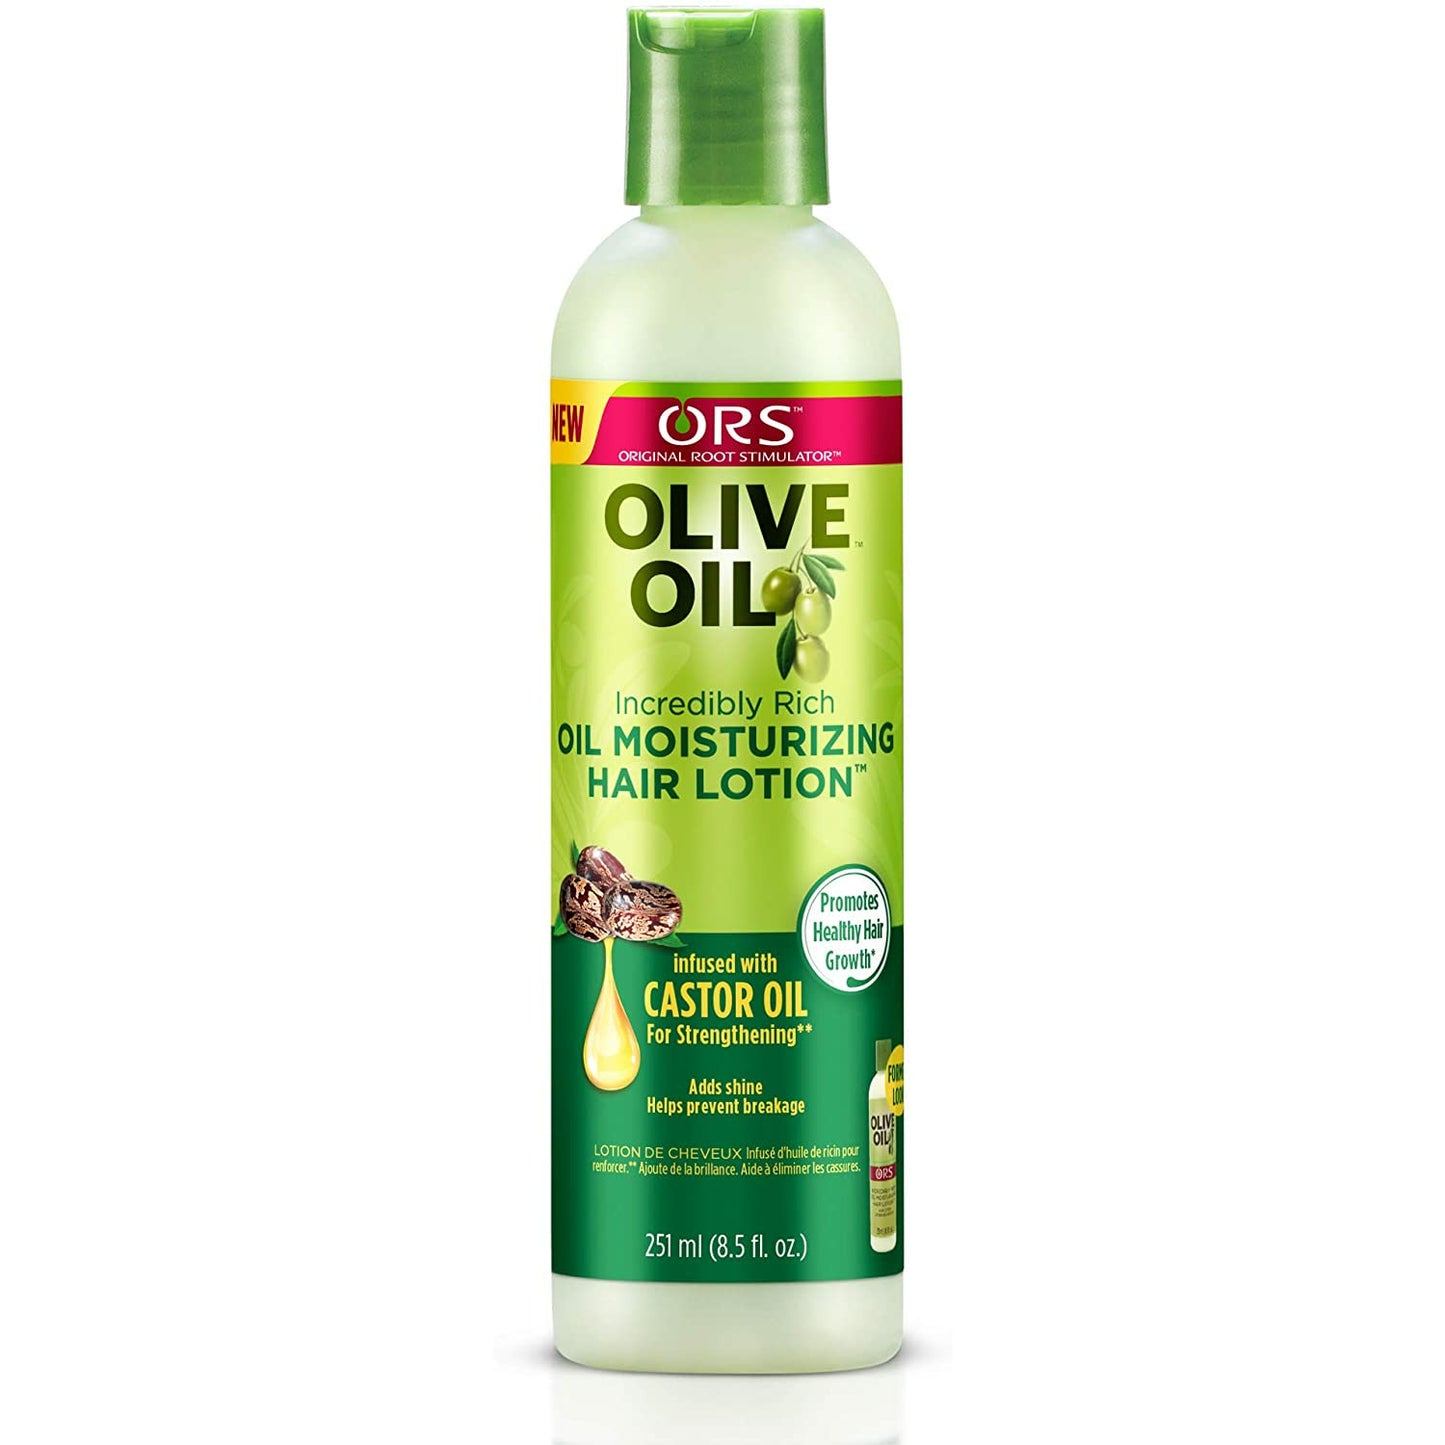 ORS Olive Oil Incredibly Rich Oil Moisturizing Hair Lotion, 8.5 oz.